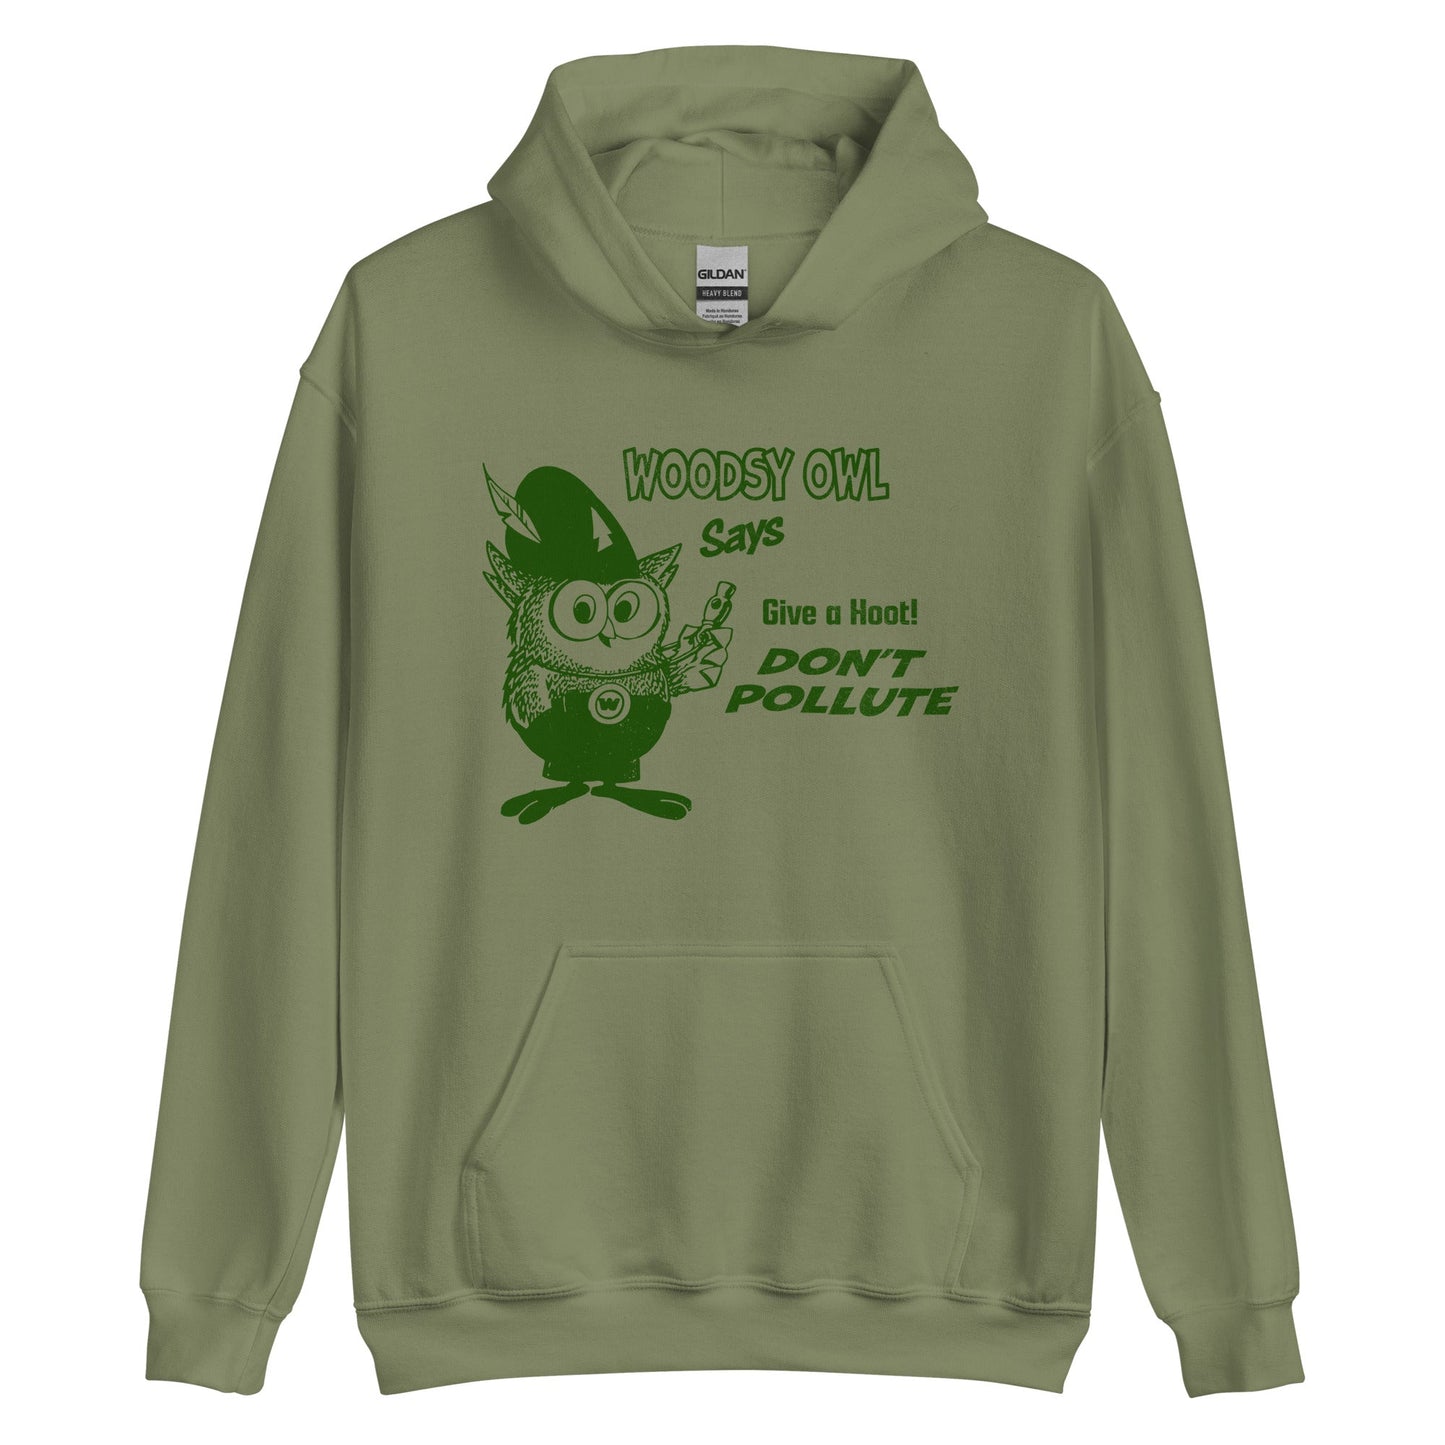 Give a Hoot! Don't Pollute Hoodie - Woodsy Owl Retro 80s Throwback Sweatshirt